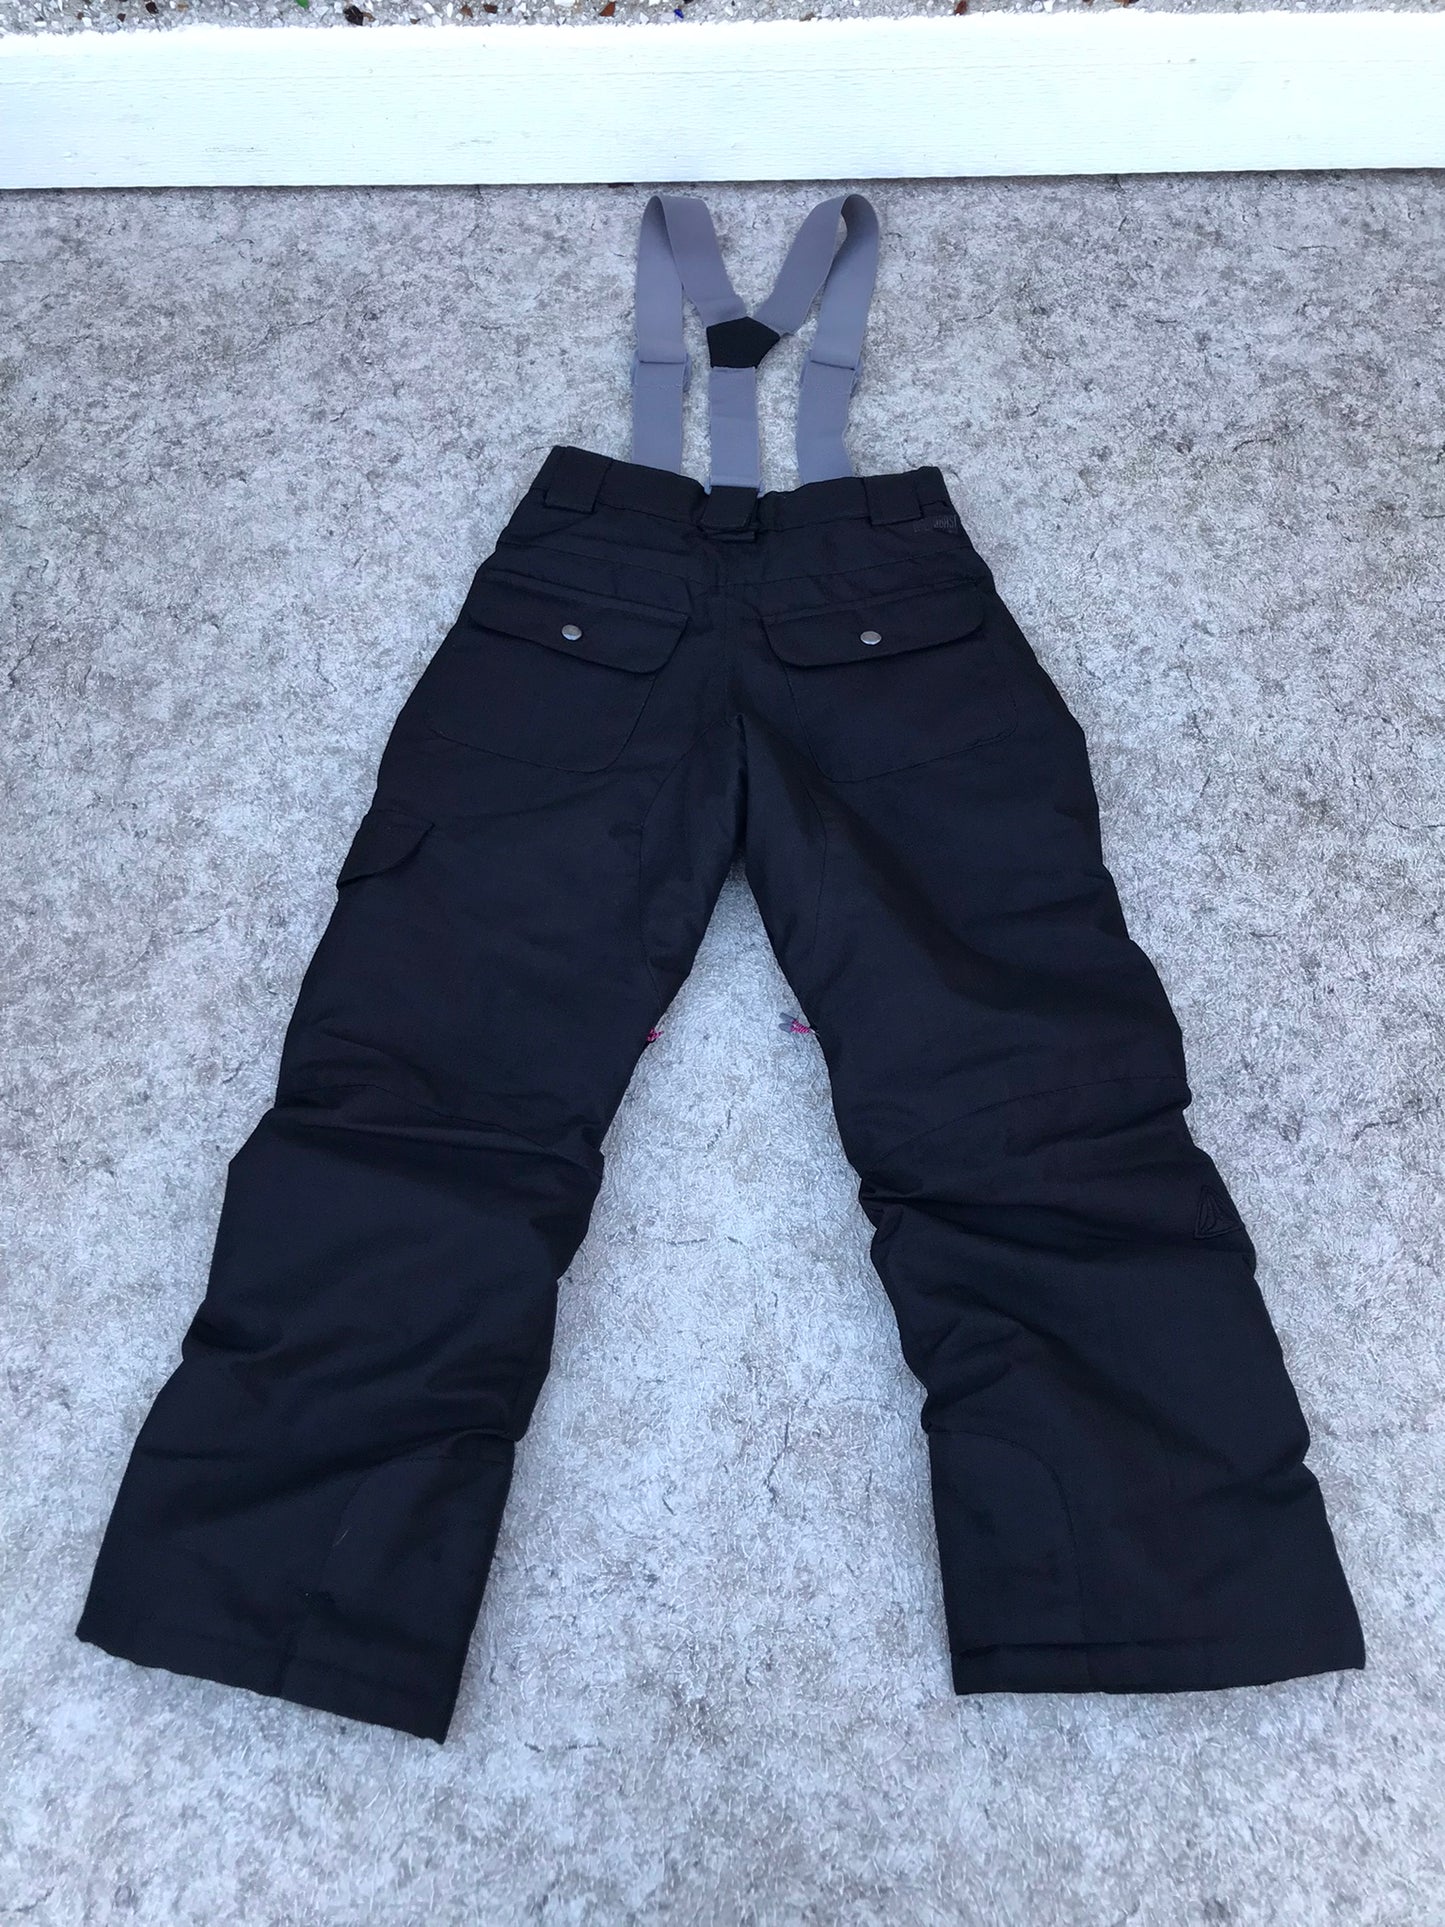 Snow Pants Child Size 10-12  Firefly Black With Removeable Straps Excellent